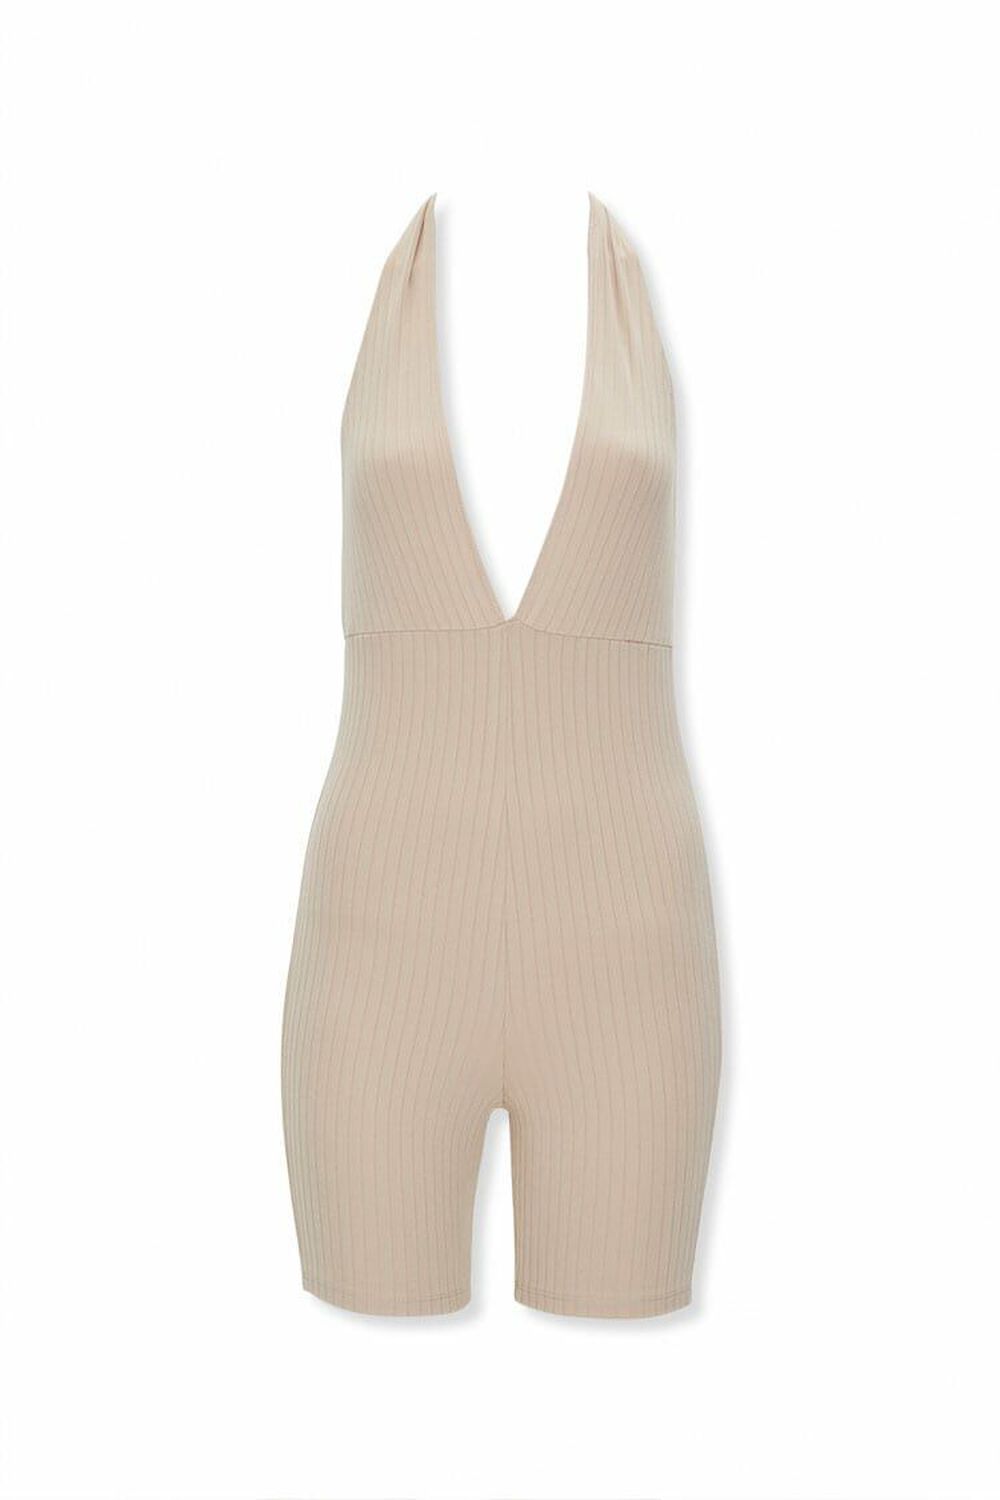 TAUPE Ribbed Plunging Romper, image 1